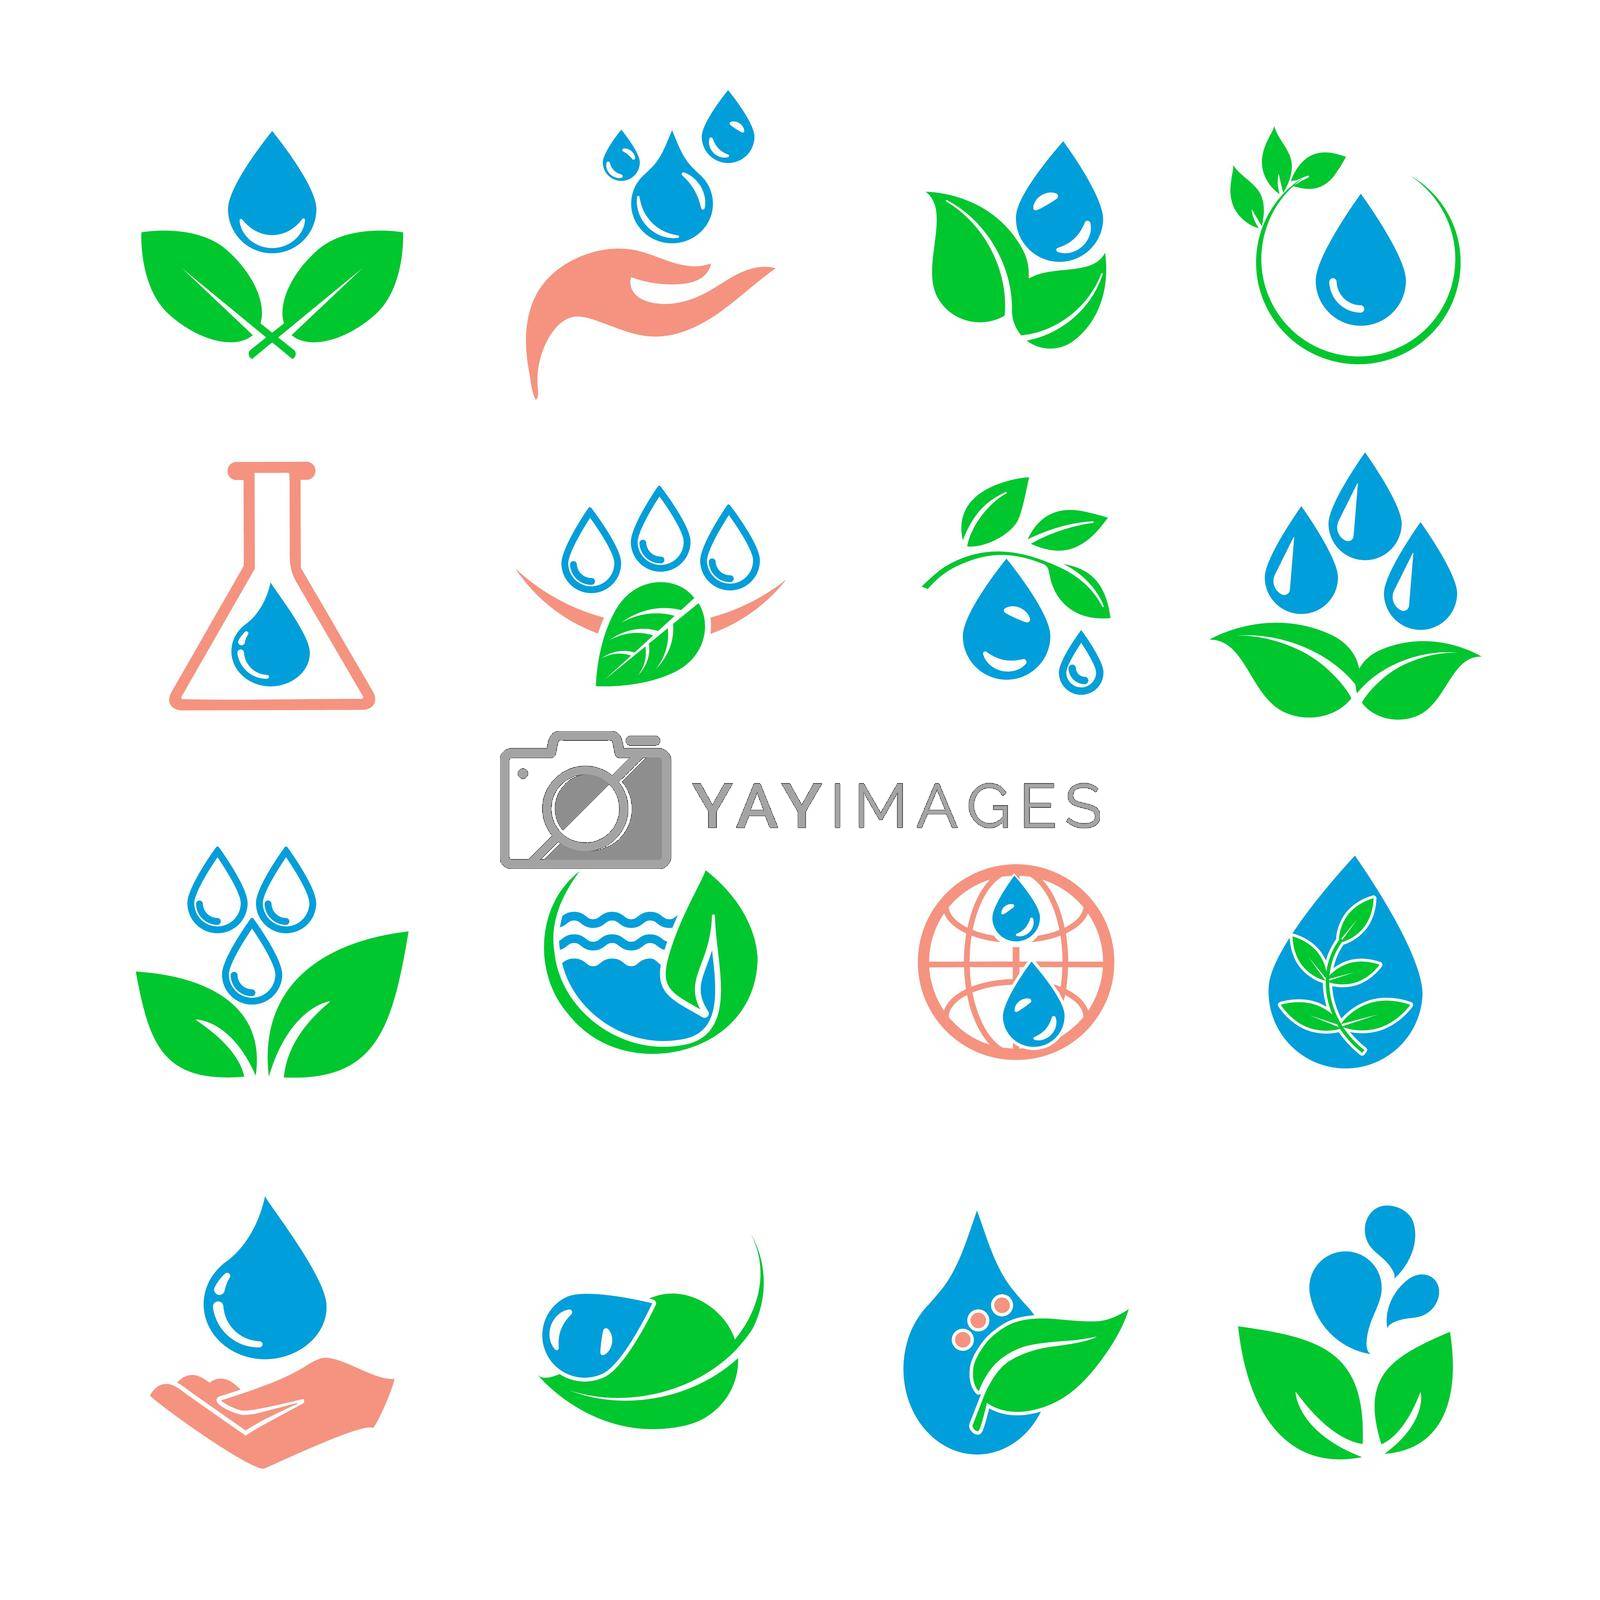 Royalty free image of Vector set of water drop icons by GALA_art